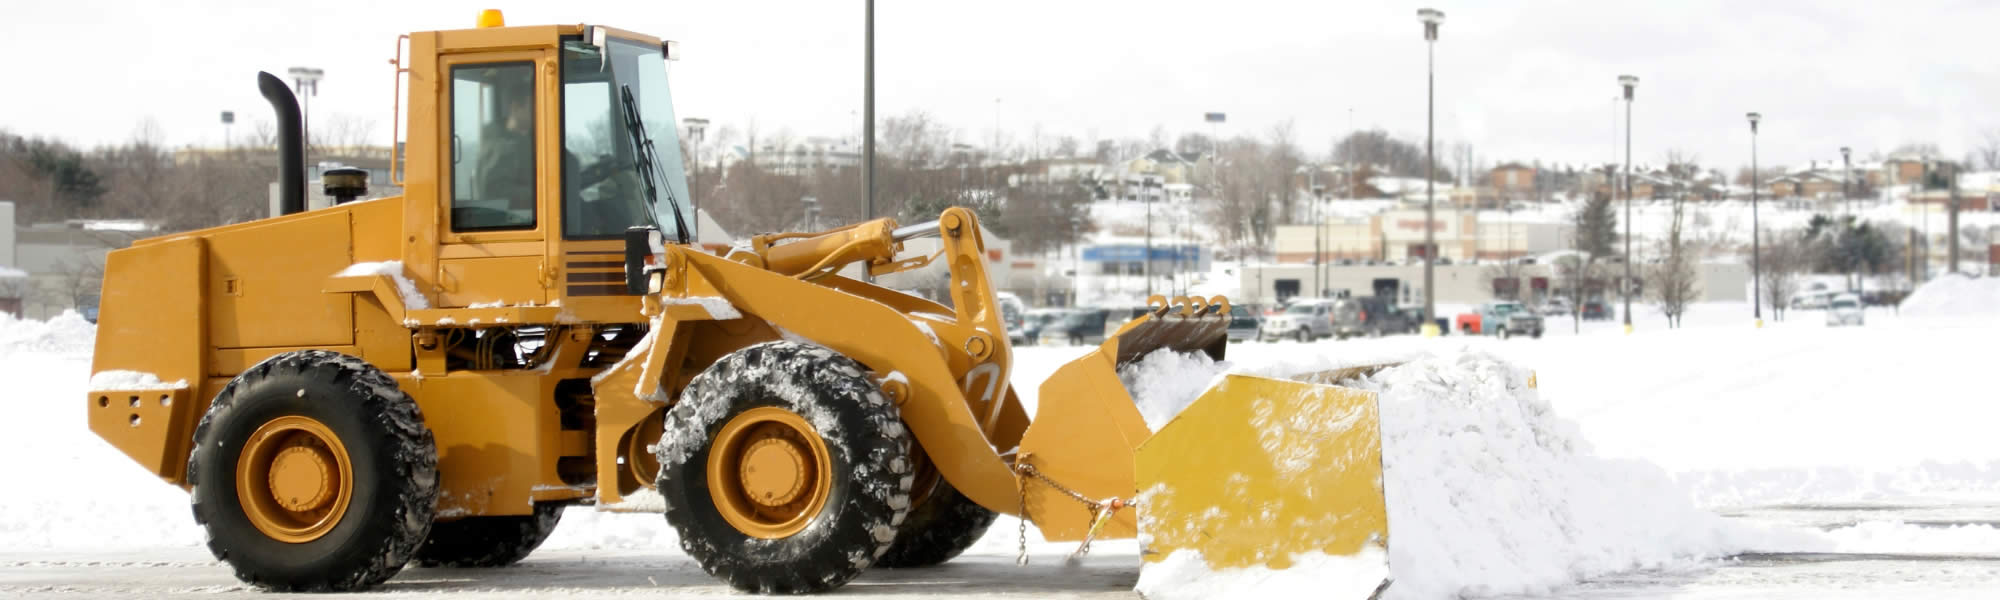 De Pere Snow and Ice Removal Services near me